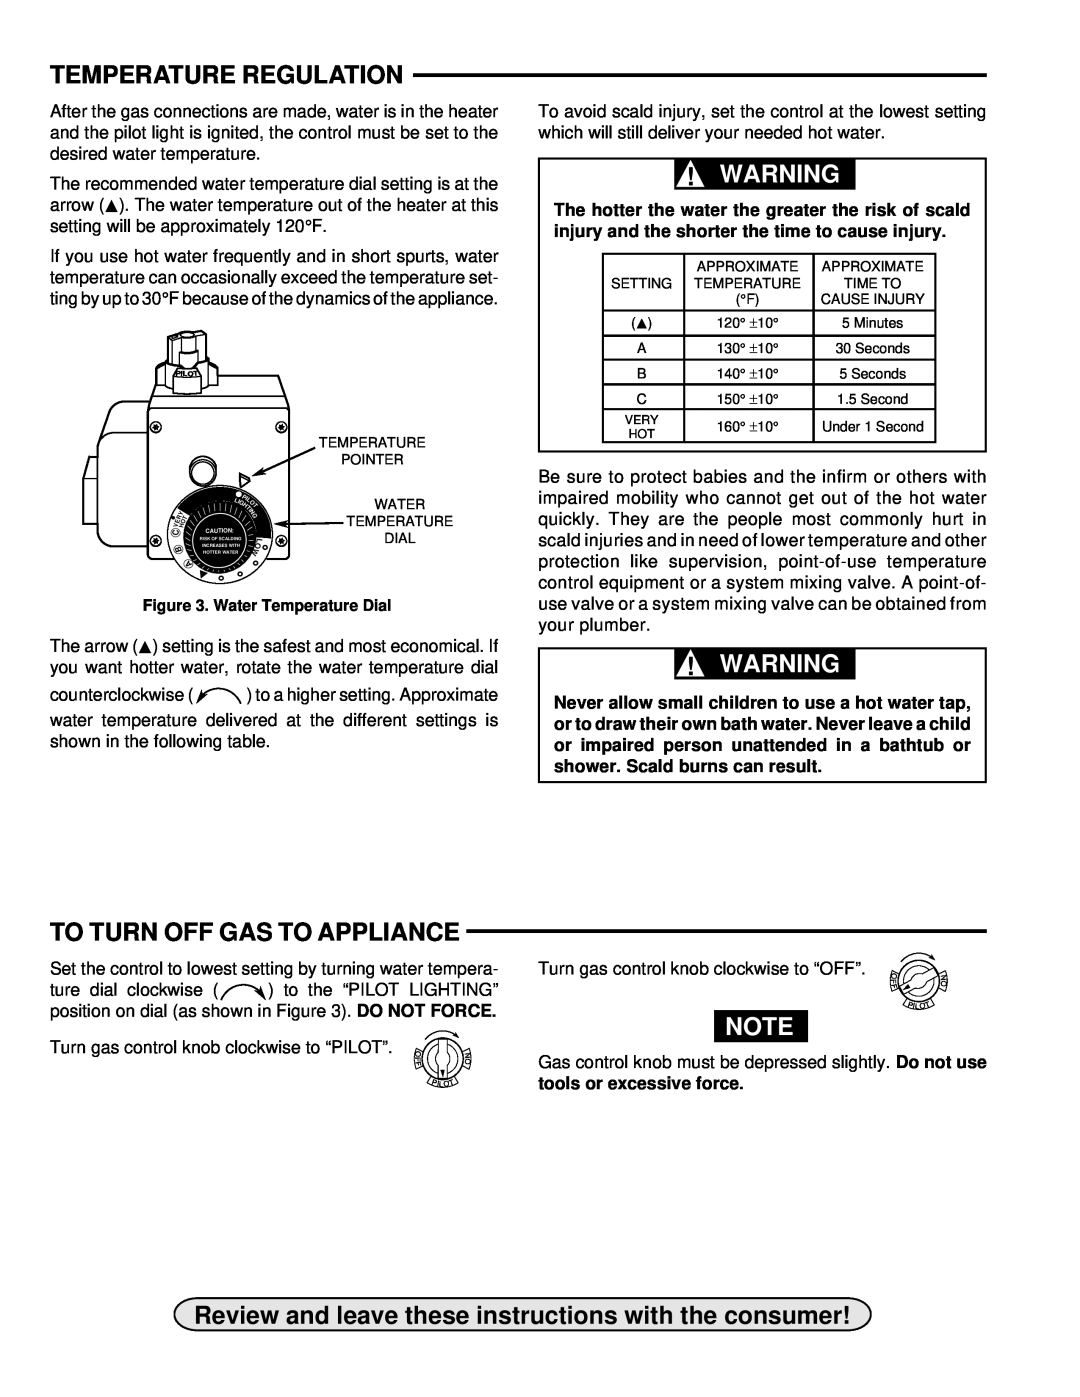 White Rodgers 37C72U installation instructions Temperature Regulation, To Turn Off Gas To Appliance 